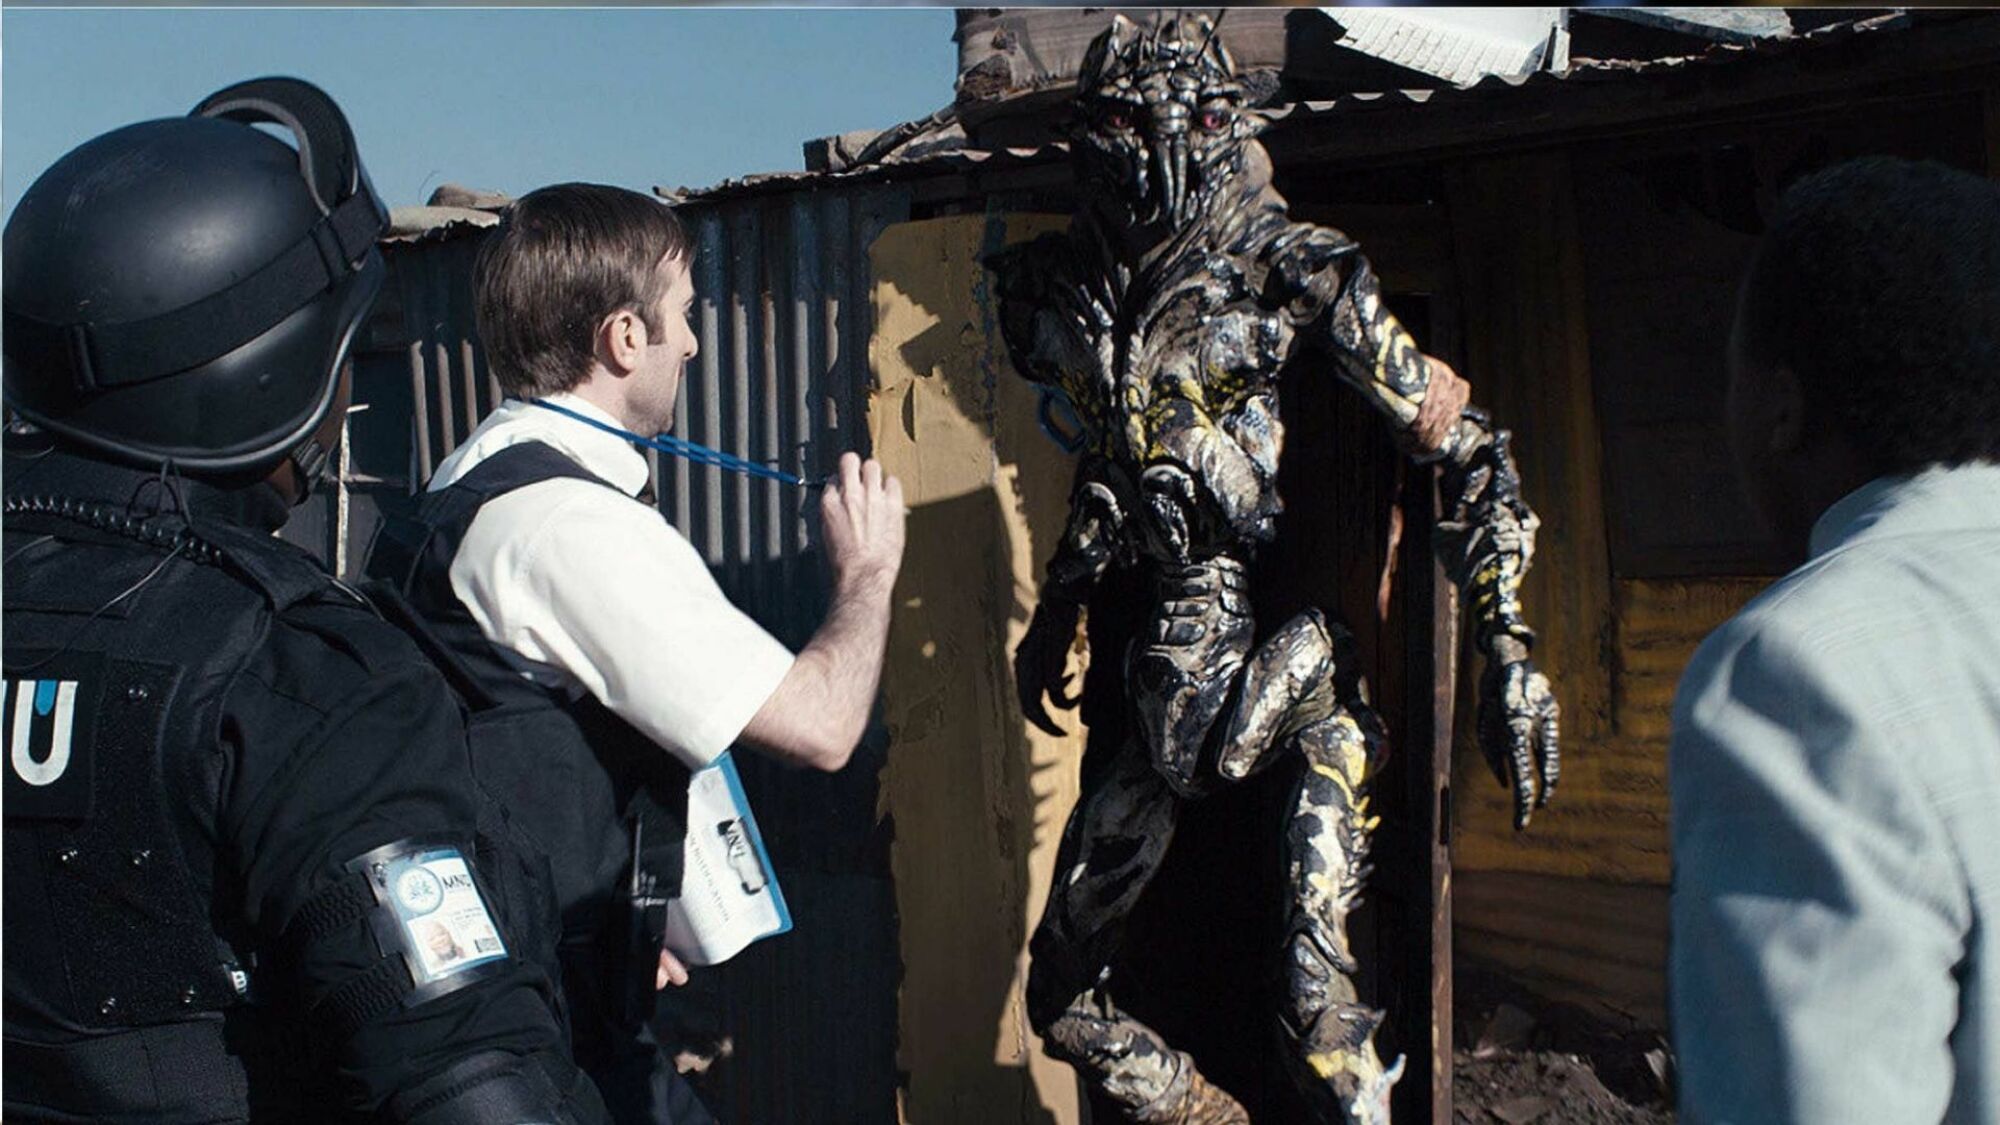 A government agent presents his badge to an extraterrestrial outside a hovel.